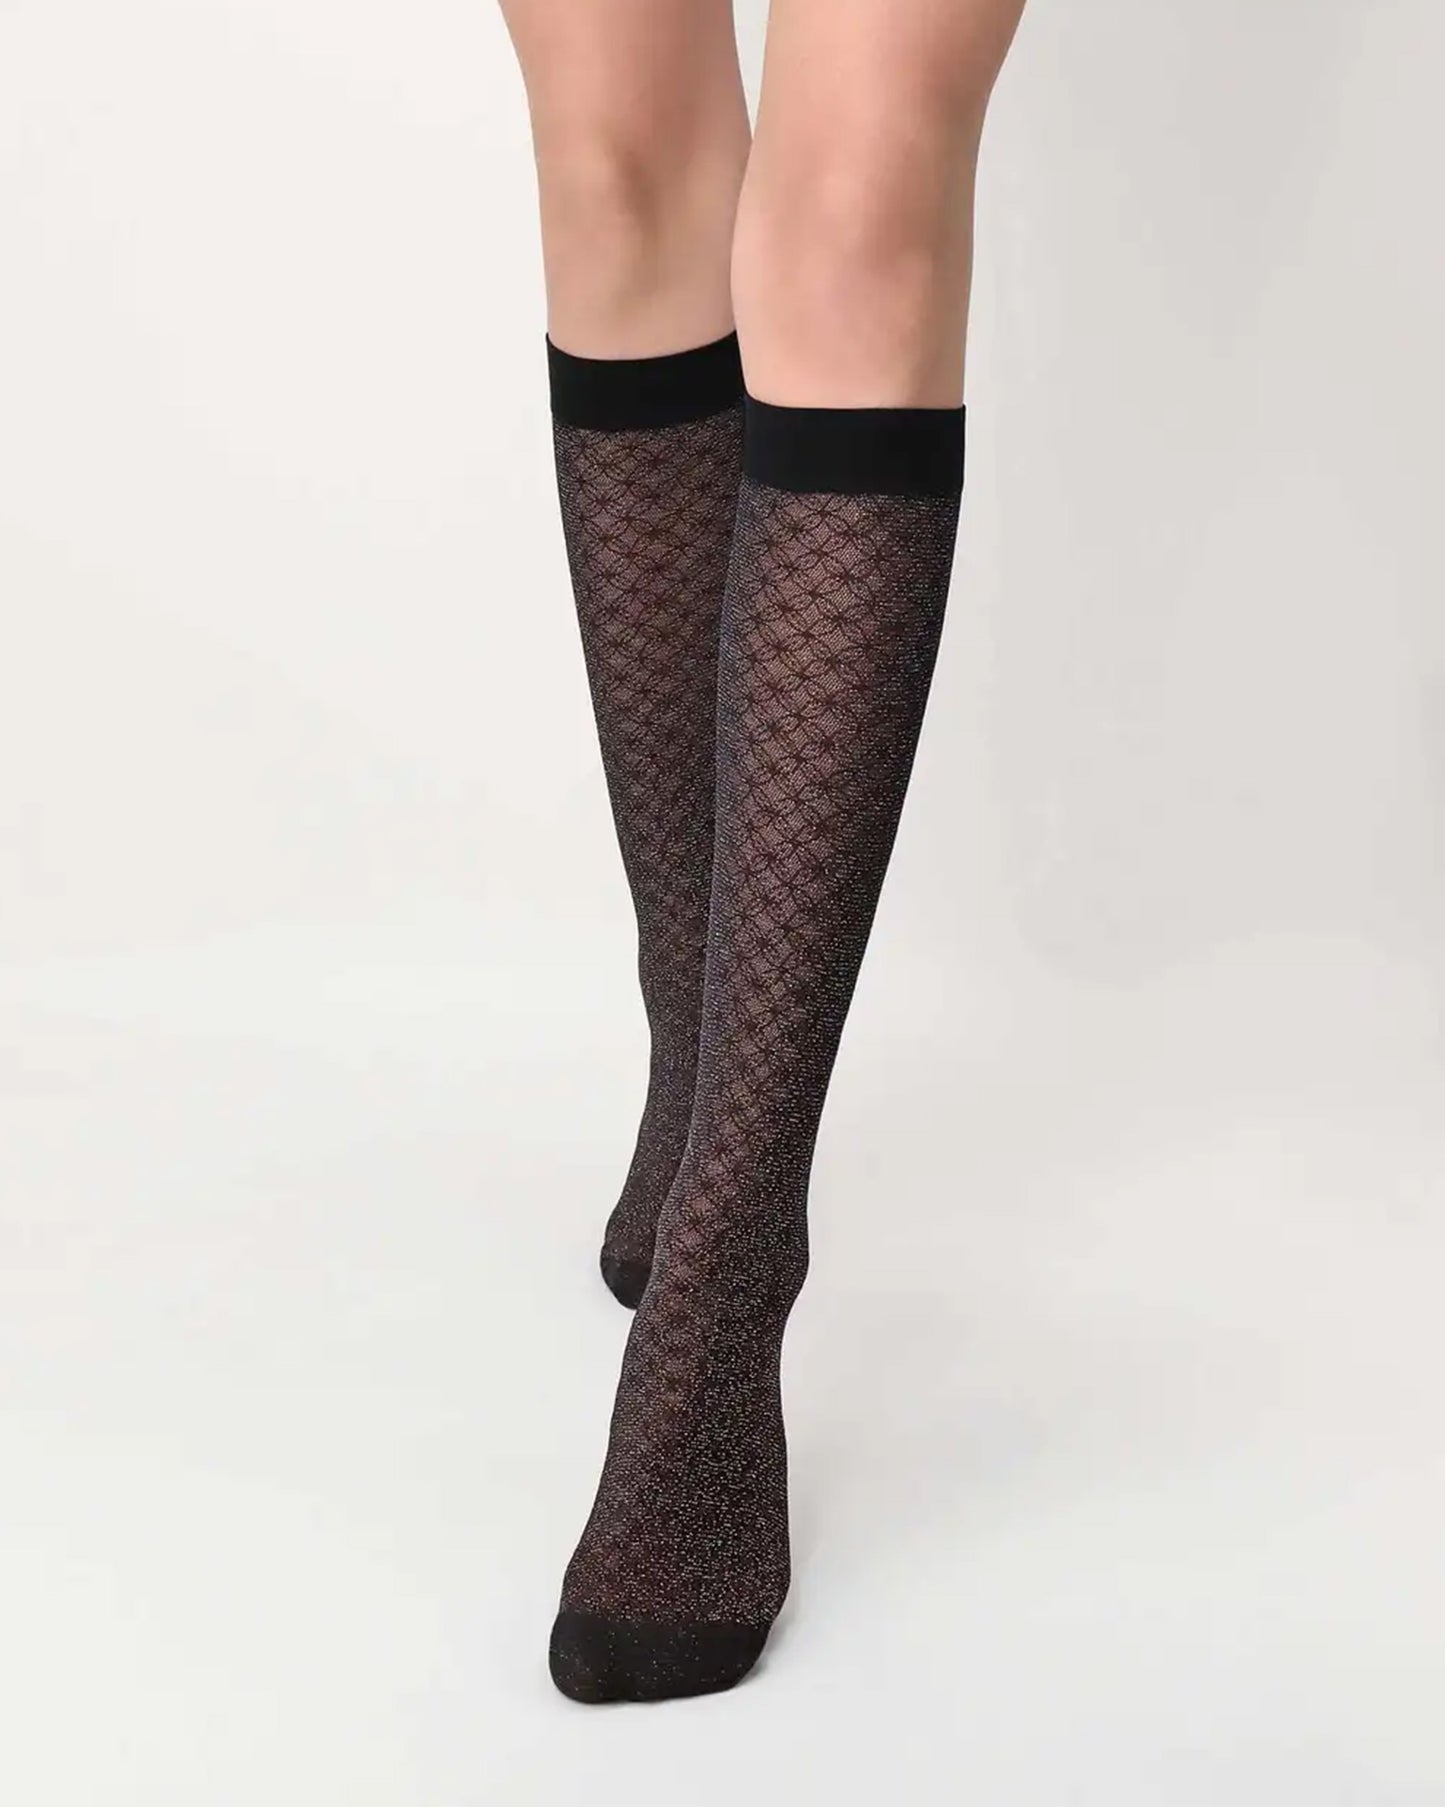 Oroblù Sparkly Lace Knee-Highs - Semi sheer fashion tights with an all over delicate geometric lace style pattern in silver lamé, plain reinforced toe and plain comfort cuff.